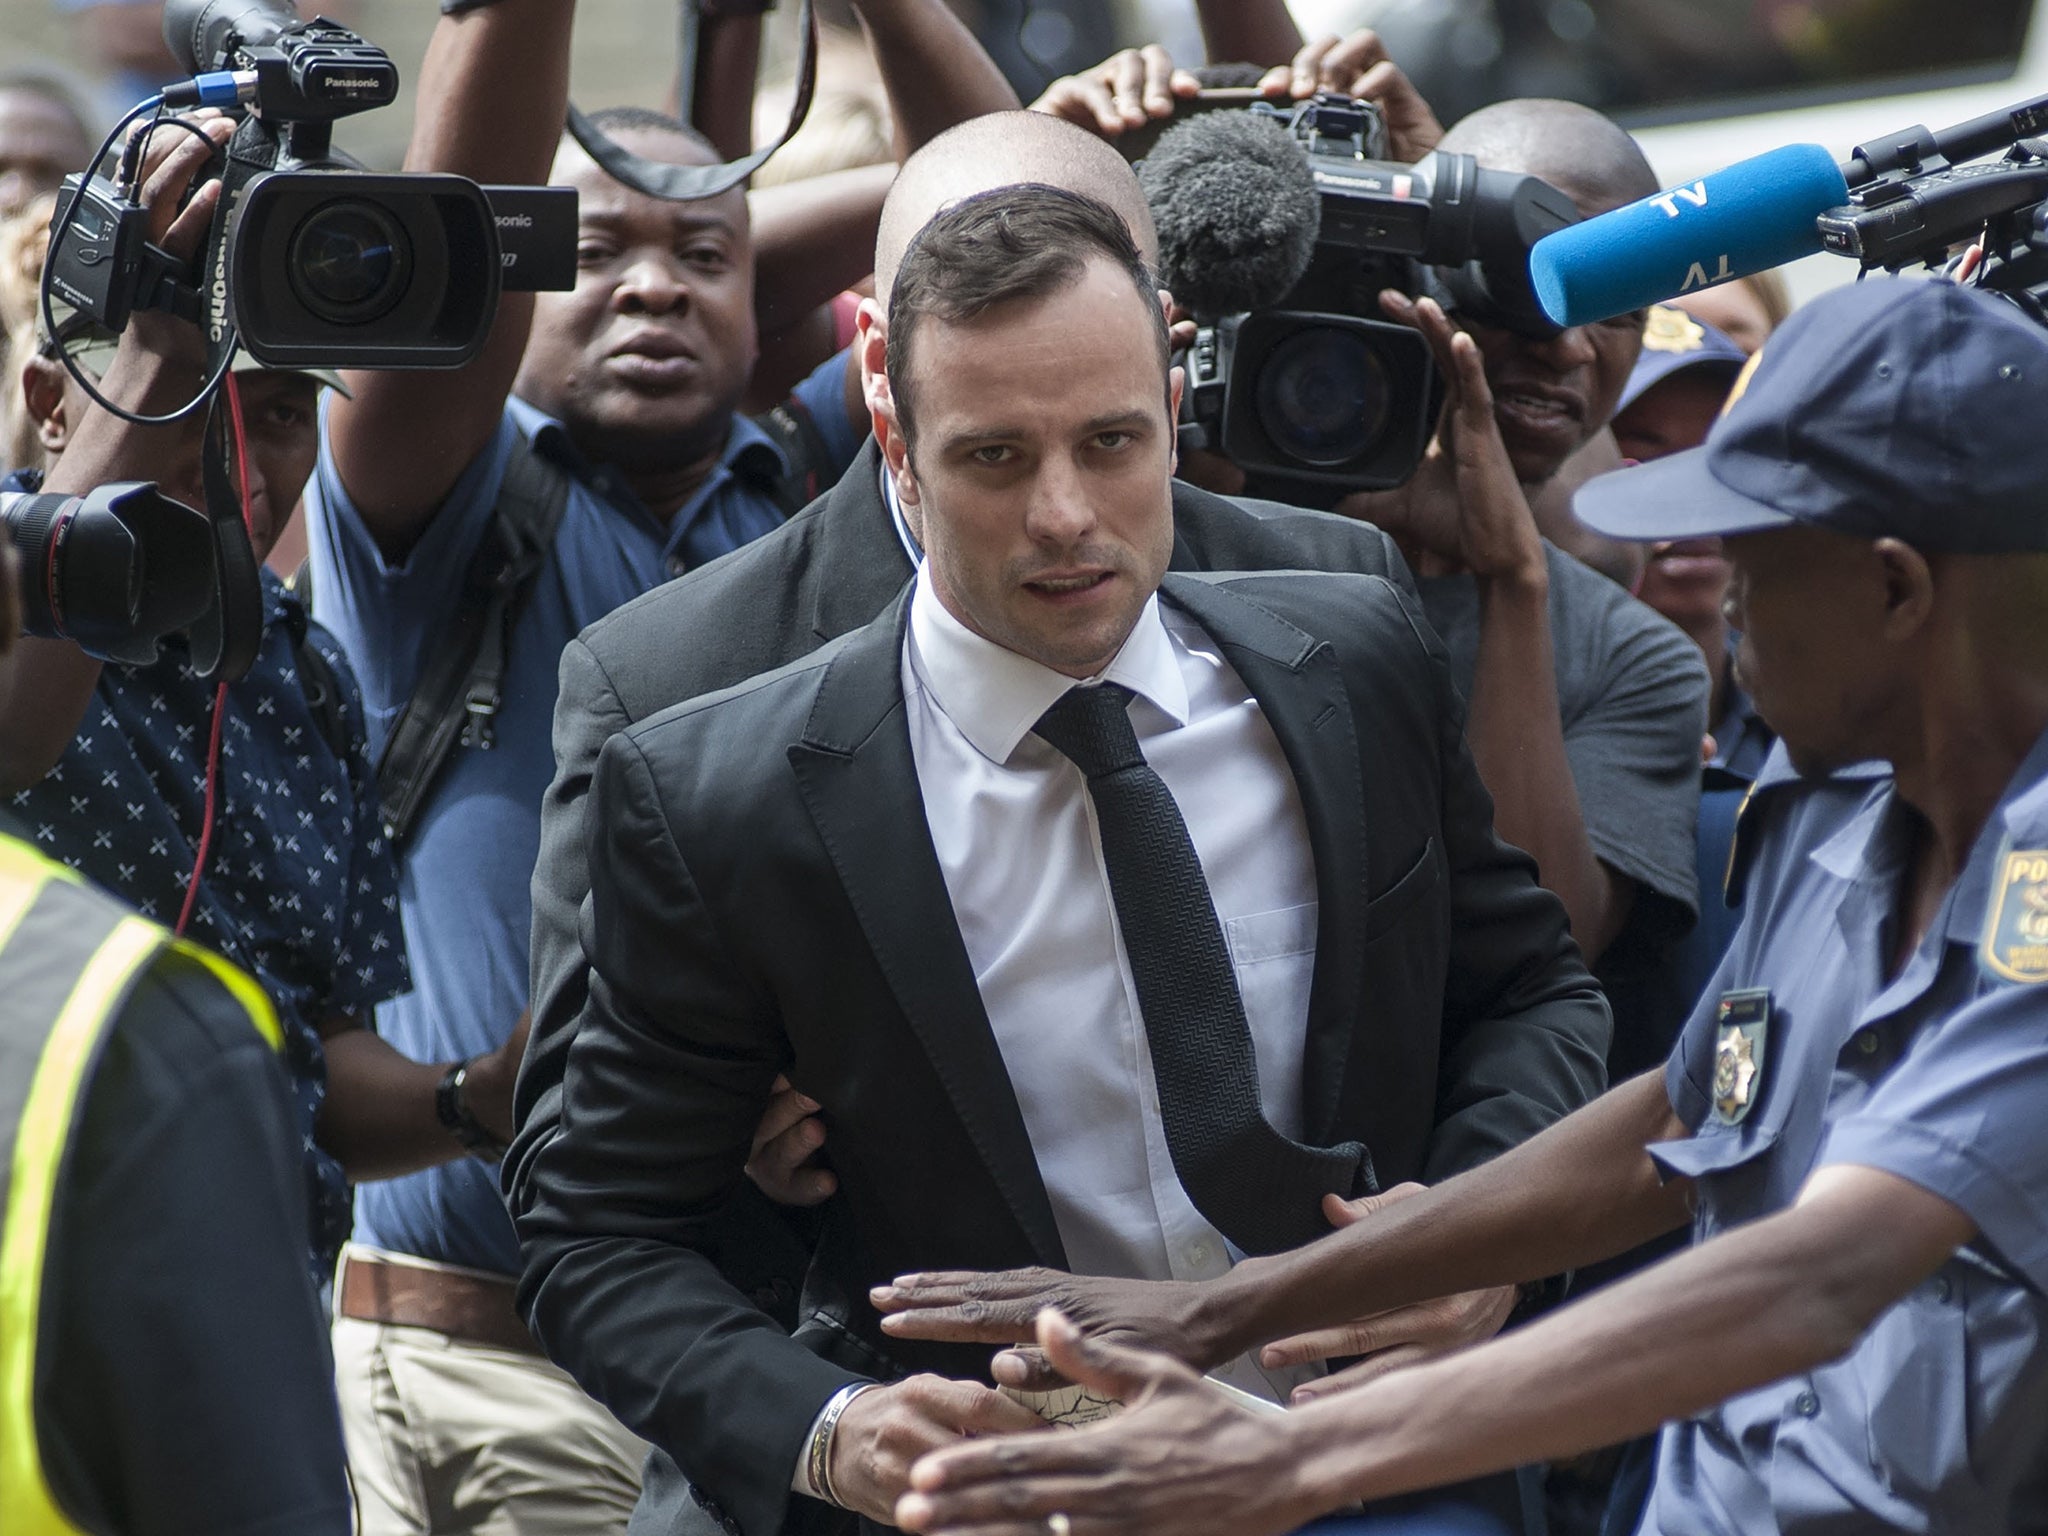 Oscar Pistorius arrives for a court appearance in December 2015 to apply for bail after his manslaughter conviction was upgraded to murder